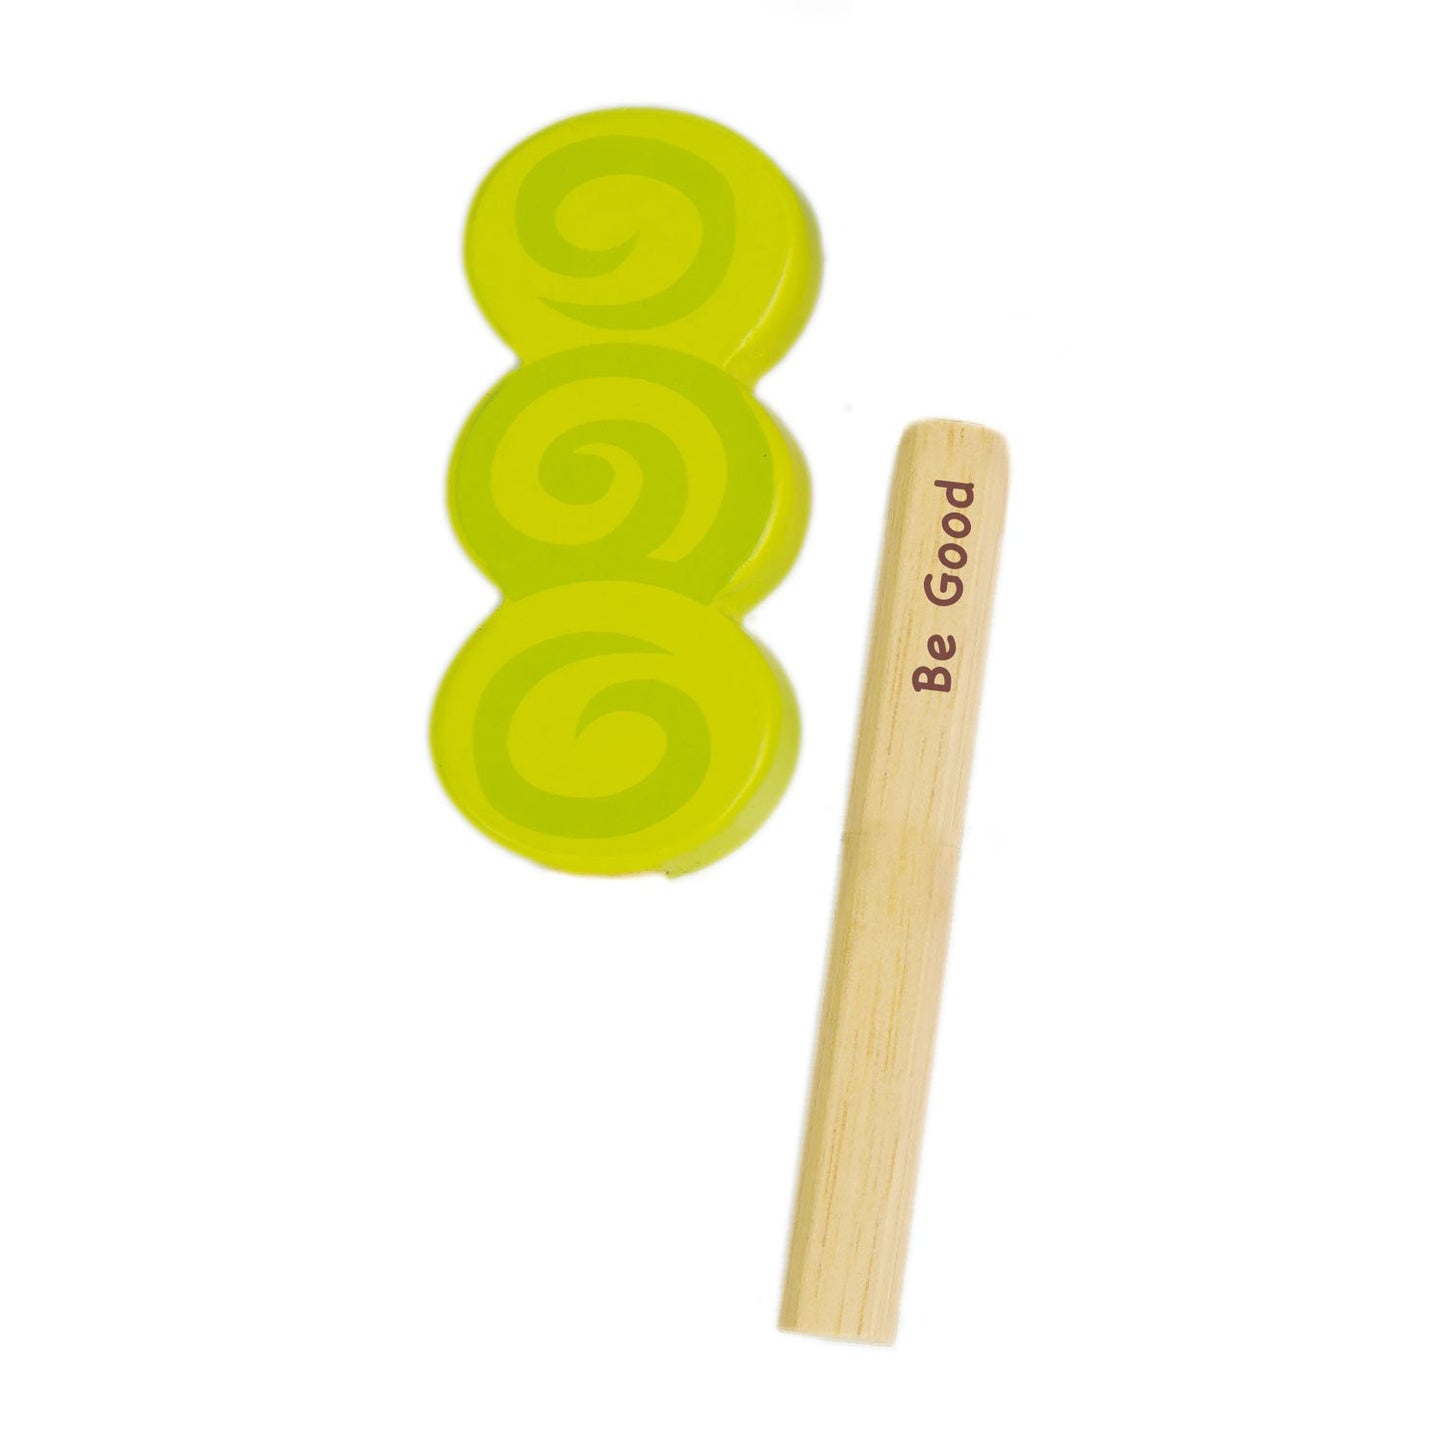 Play Set (Wood) - Ice Lolly Shop